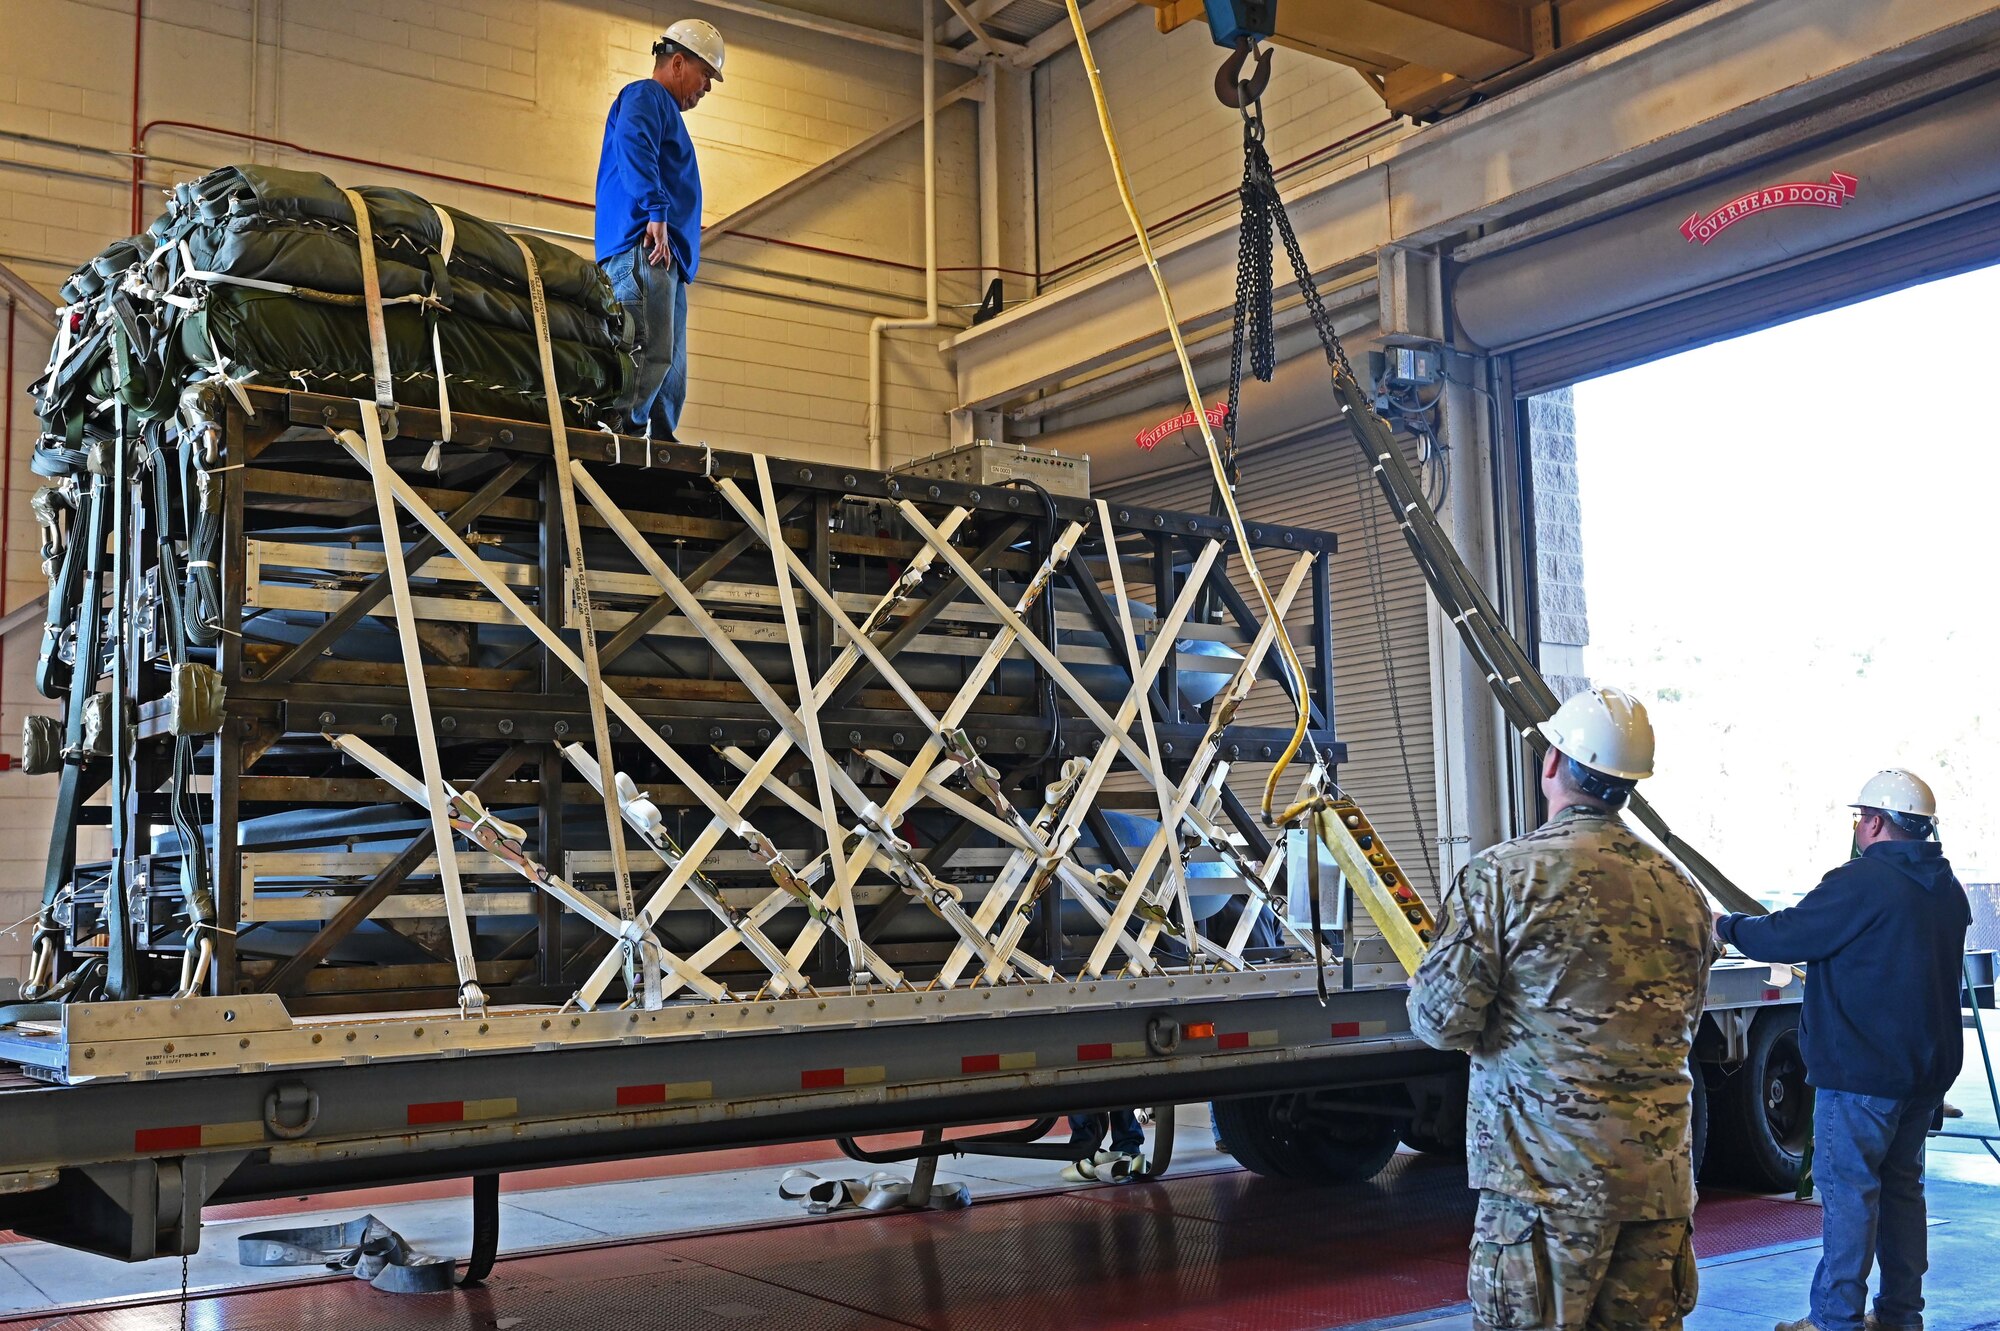 Airmen and Riggers with the 1st Special Operations Squadron Logistics Readiness Squadron load a Rapid Dragon Palletized Weapon System aboard an MC-130J Commando II at Hurlburt Field, Florida, Dec. 13, 2021. The Rapid Dragon Program demonstrates the ability to employ weapons using standard airdrop procedures from cargo aircraft anytime and anywhere. (U.S. Air Force photo by Staff Sgt. Brandon Esau)